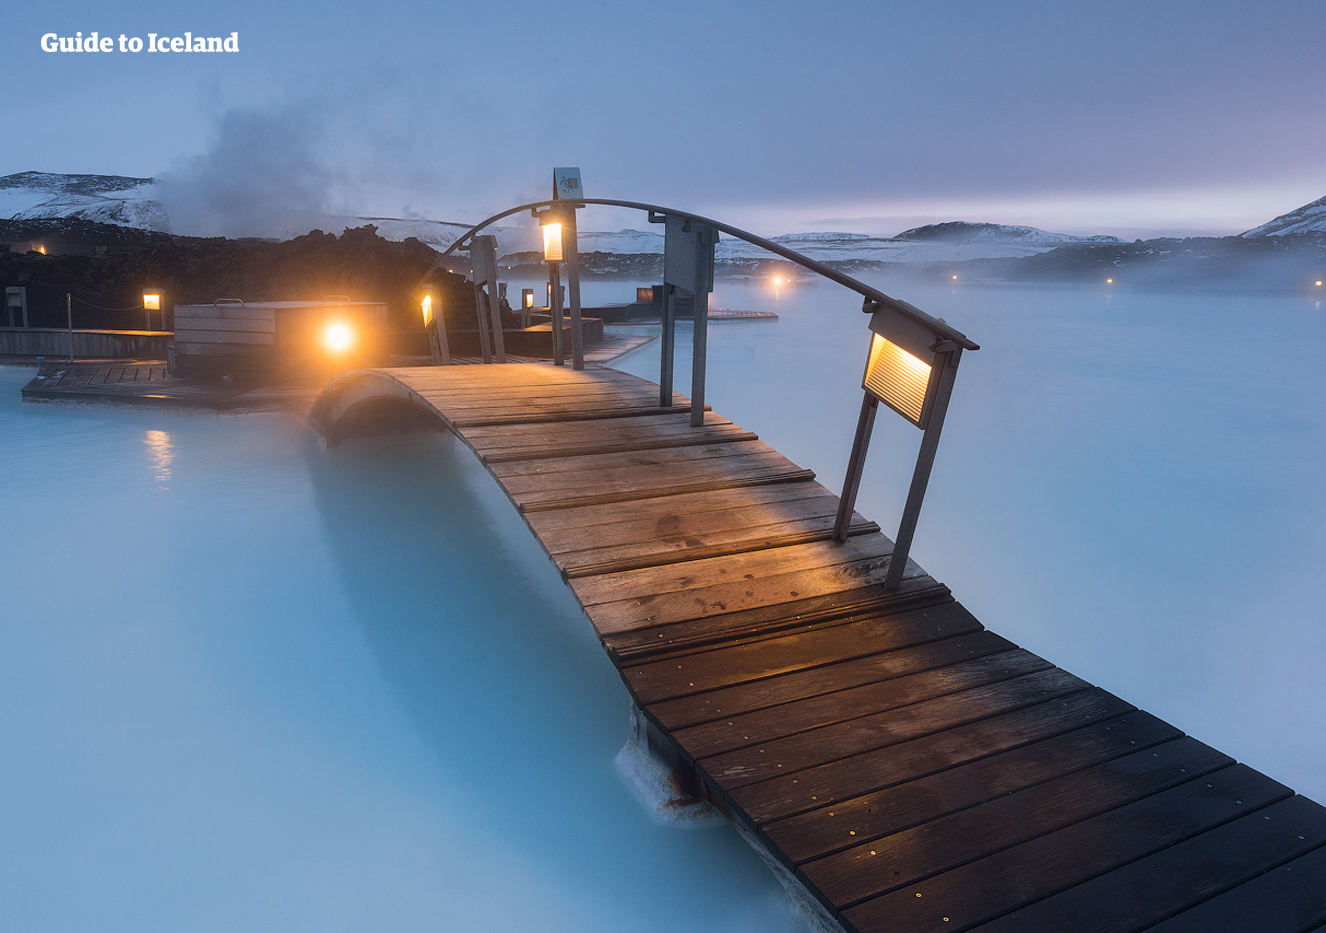 A visit to the Blue Lagoon is both invigorating and relaxing